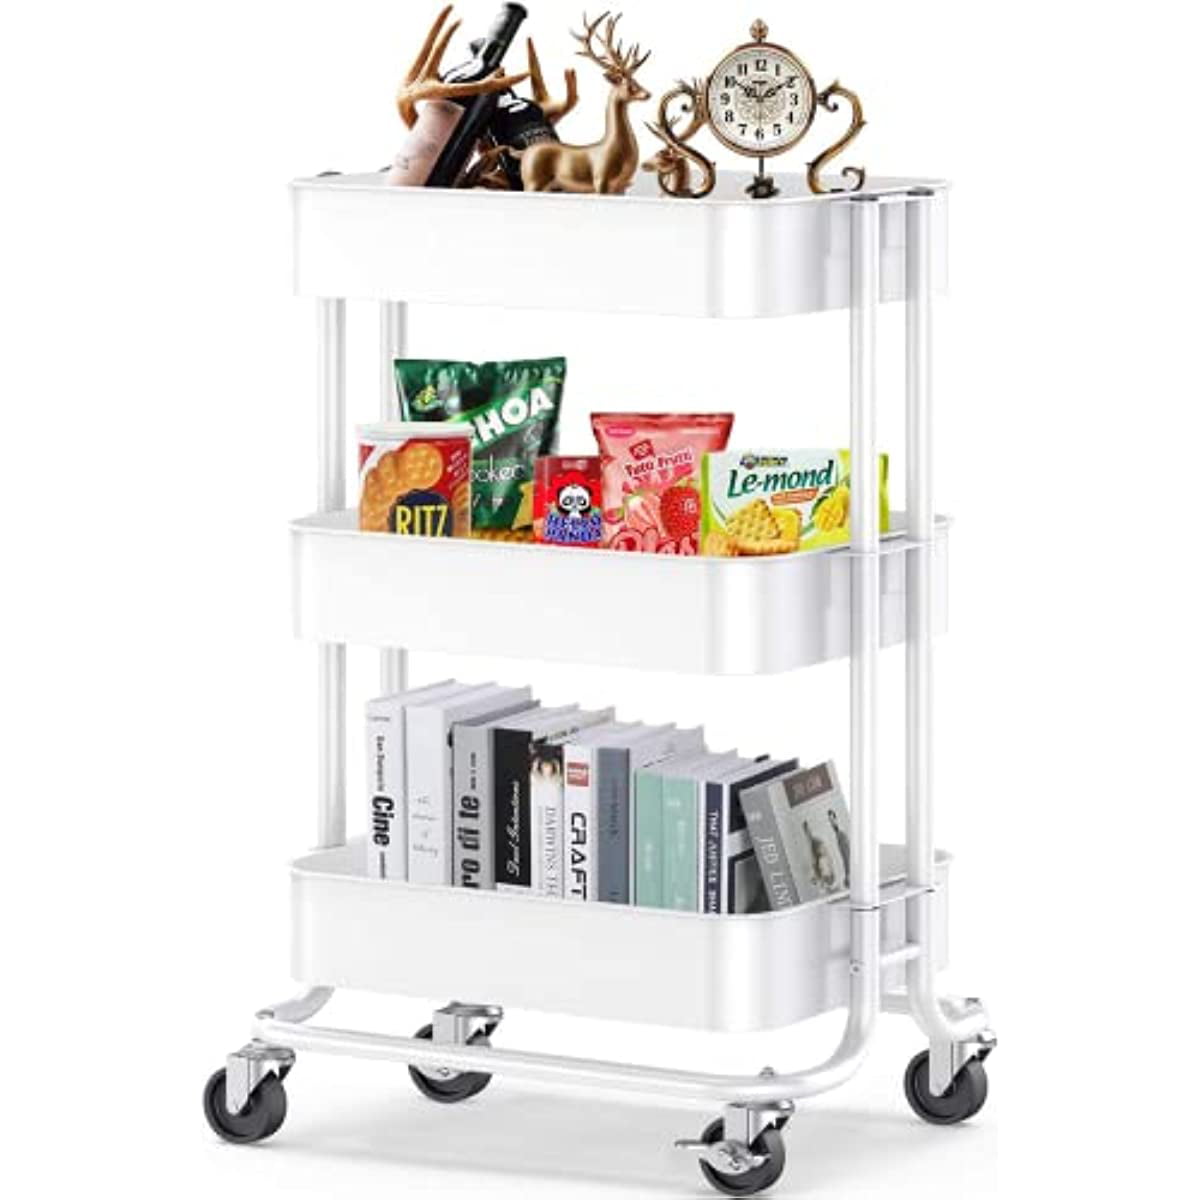 Metal Rolling Utility Cart 3-Tier， Heavy Duty Storage Cart with 2 Lockable Wheels， Multifunctional Mesh Organization Cart for Kitchen Dining Room Living Room (White)